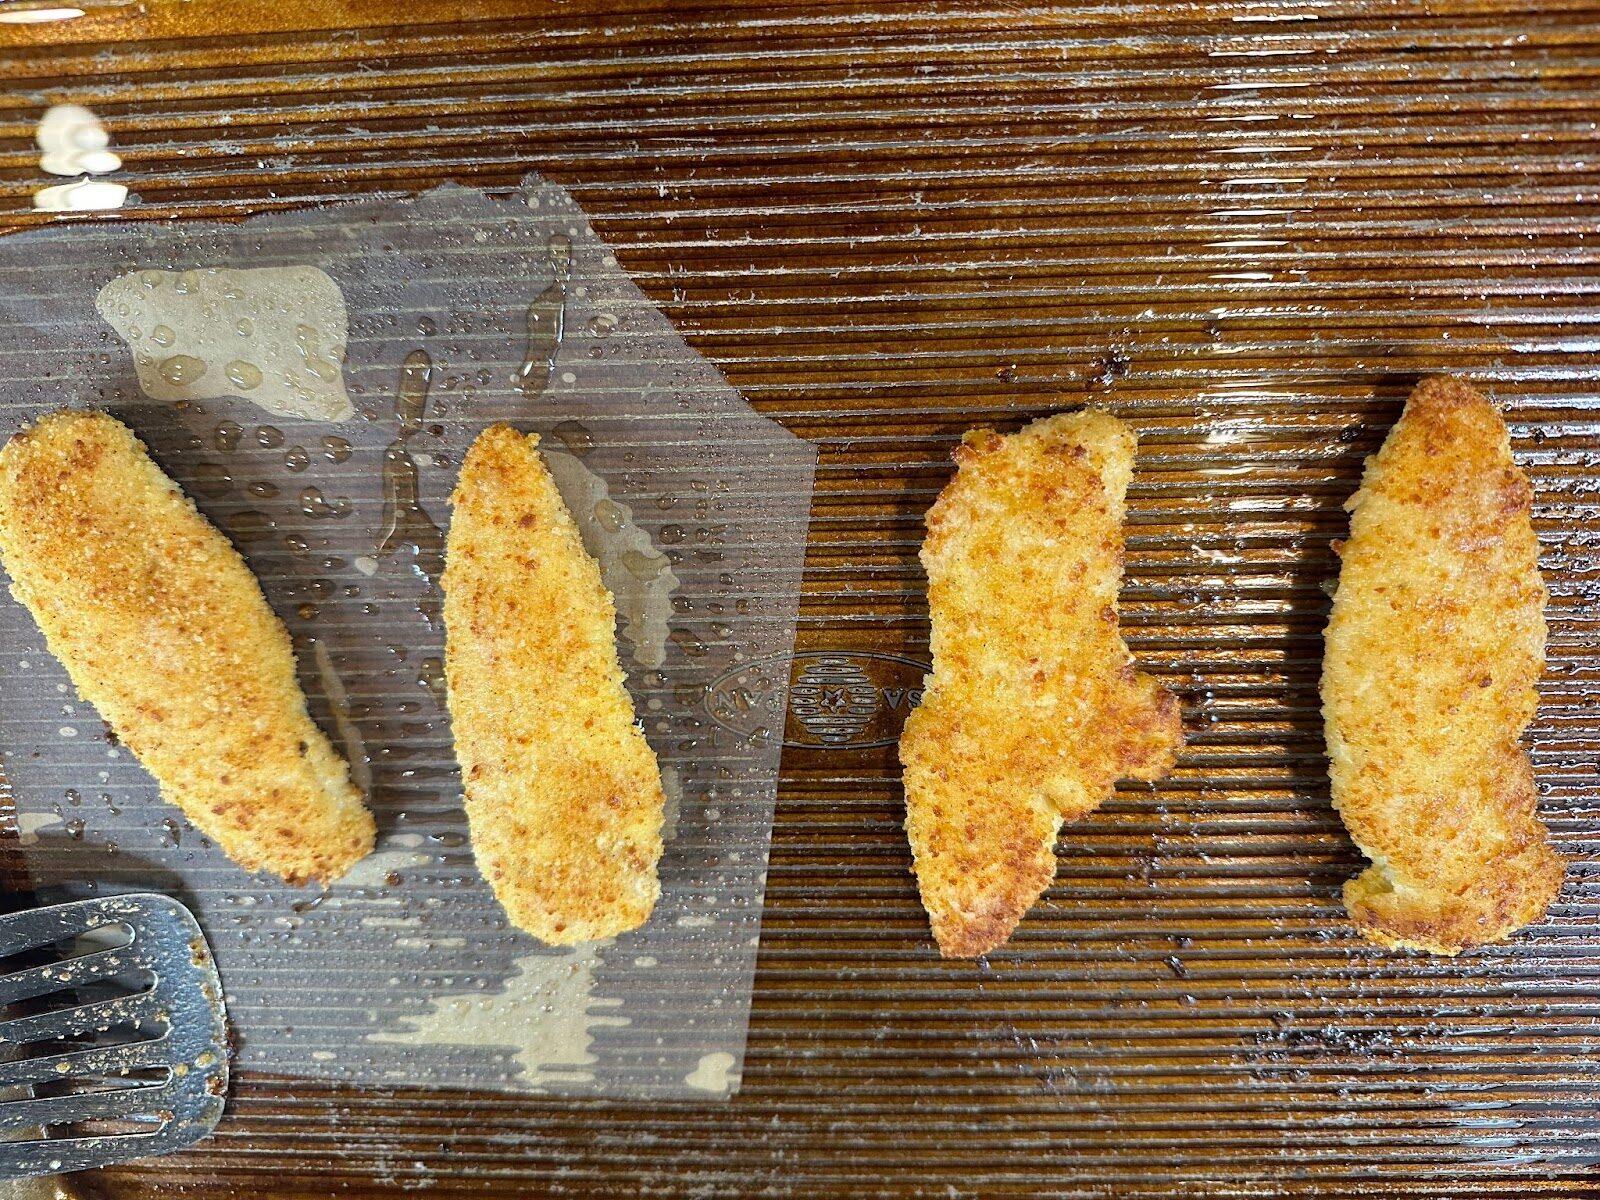 Baked chicken tenders test results on parchment paper vs. on the sheet pan.